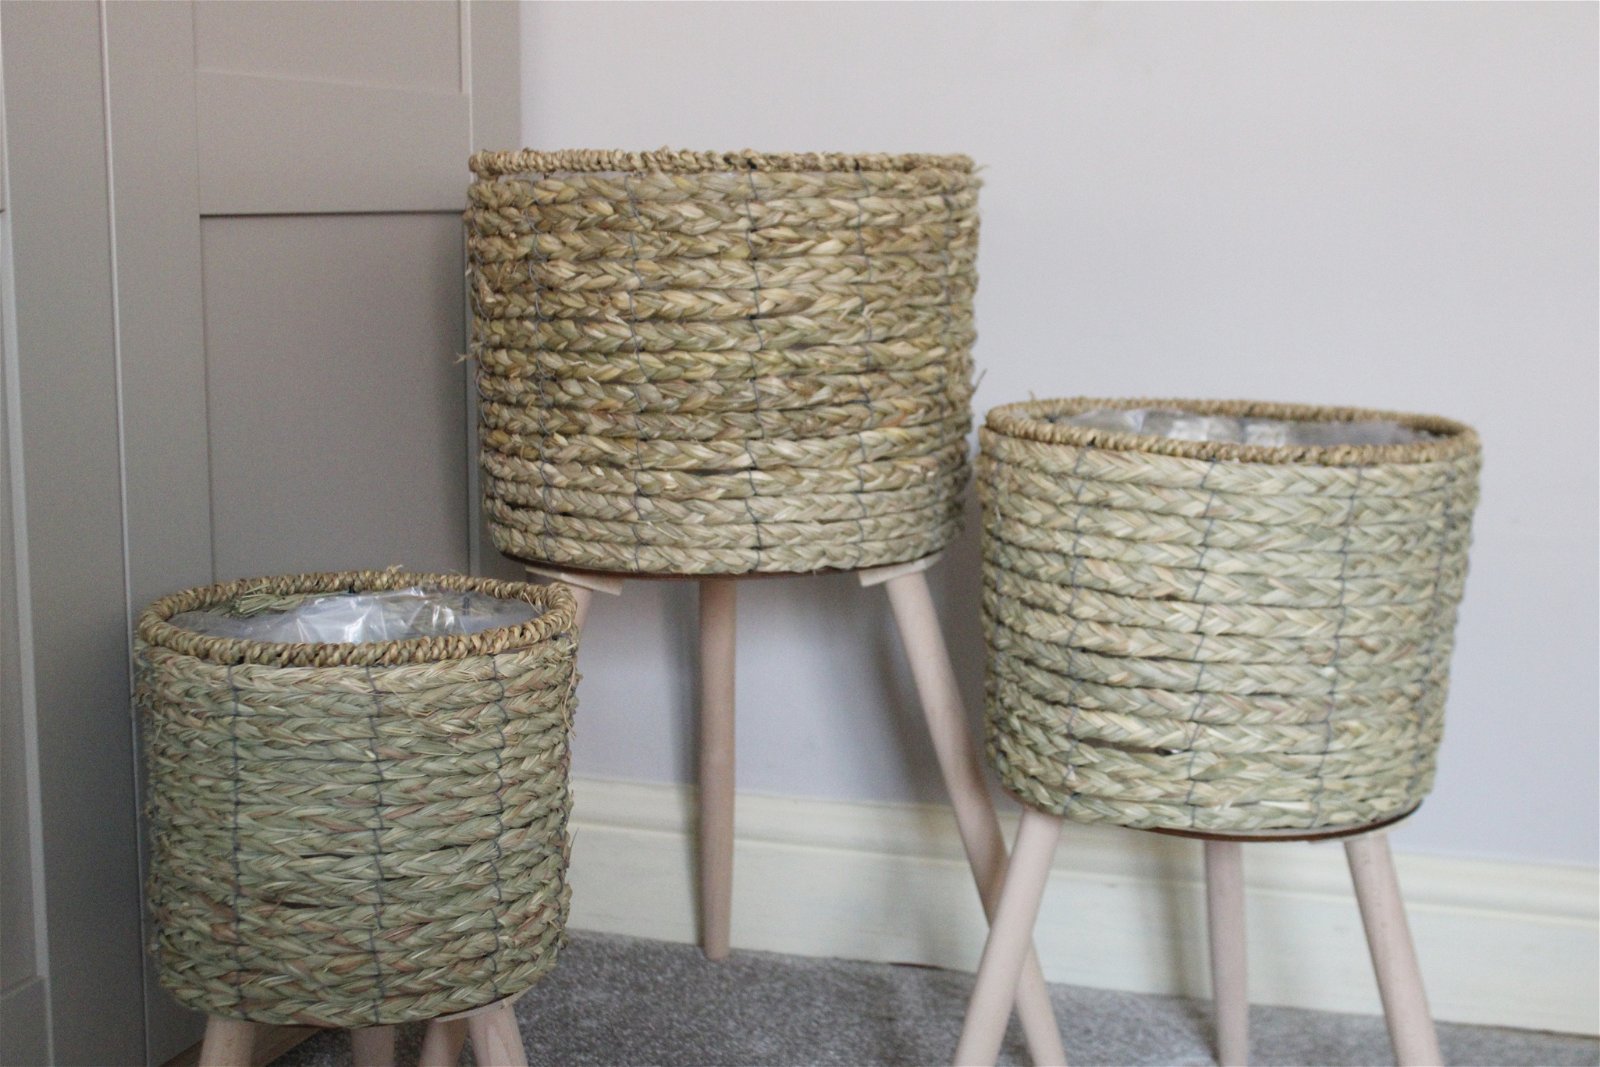 Set of Three Seagrass Planters On Stands - a Cheeky Plant